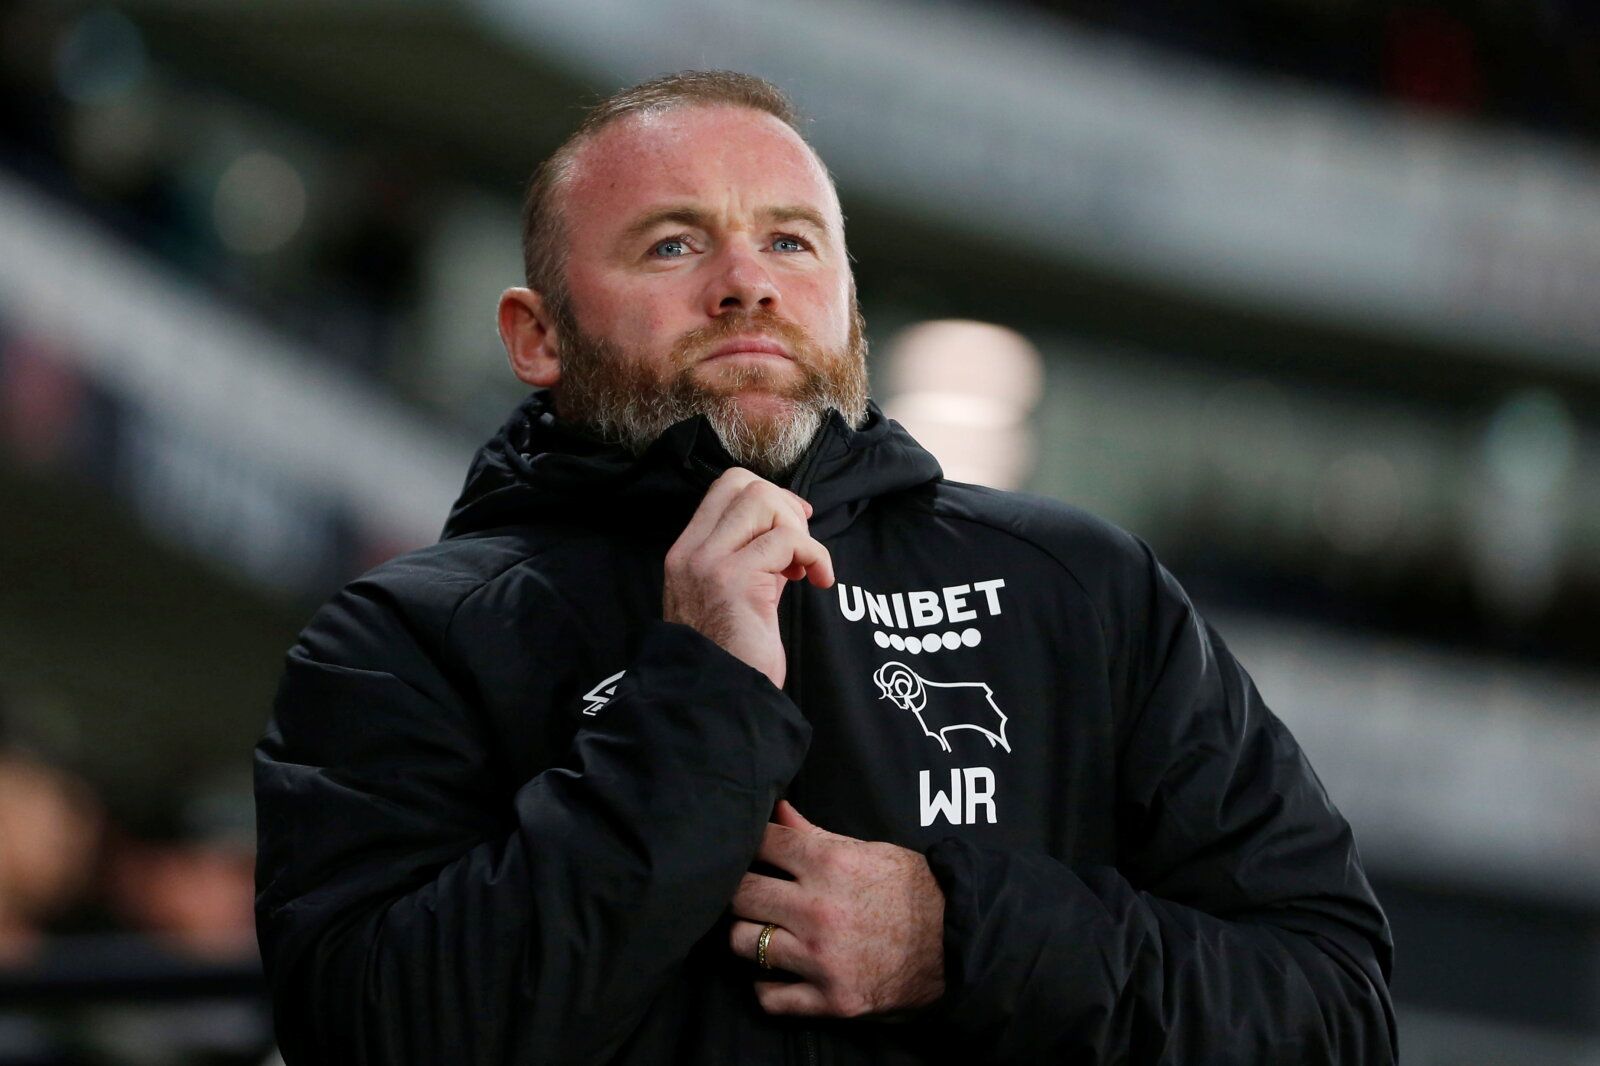 Soccer Football - Championship - Derby County v Reading - Pride Park, Derby, Britain - September 29, 2021 Derby County manager Wayne Rooney  Action Images/Craig Brough  EDITORIAL USE ONLY. No use with unauthorized audio, video, data, fixture lists, club/league logos or 